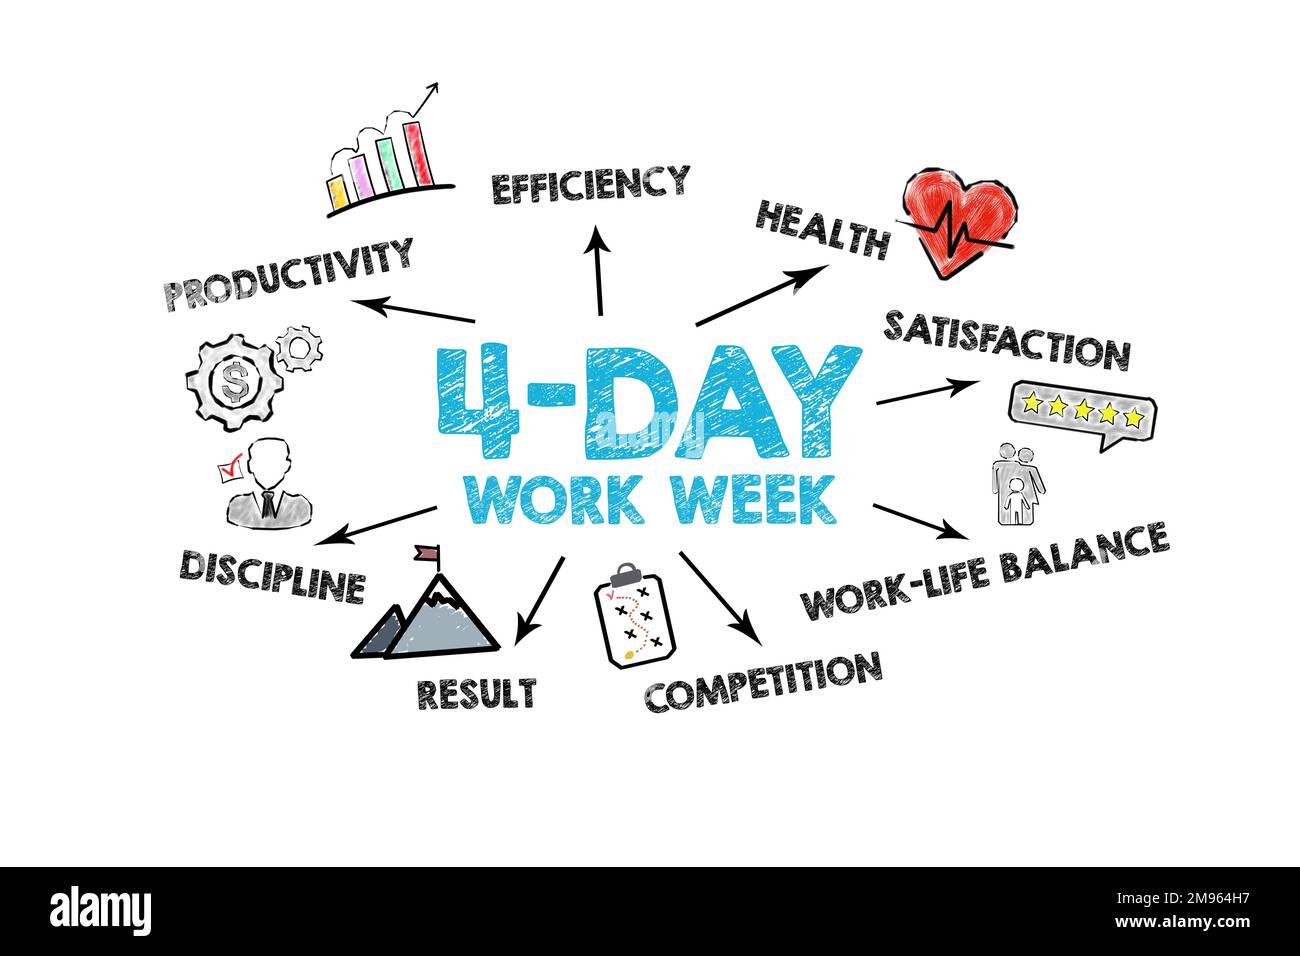 4-day work week. Illustration with icons, keywords and arrows on a white background. Stock Photo